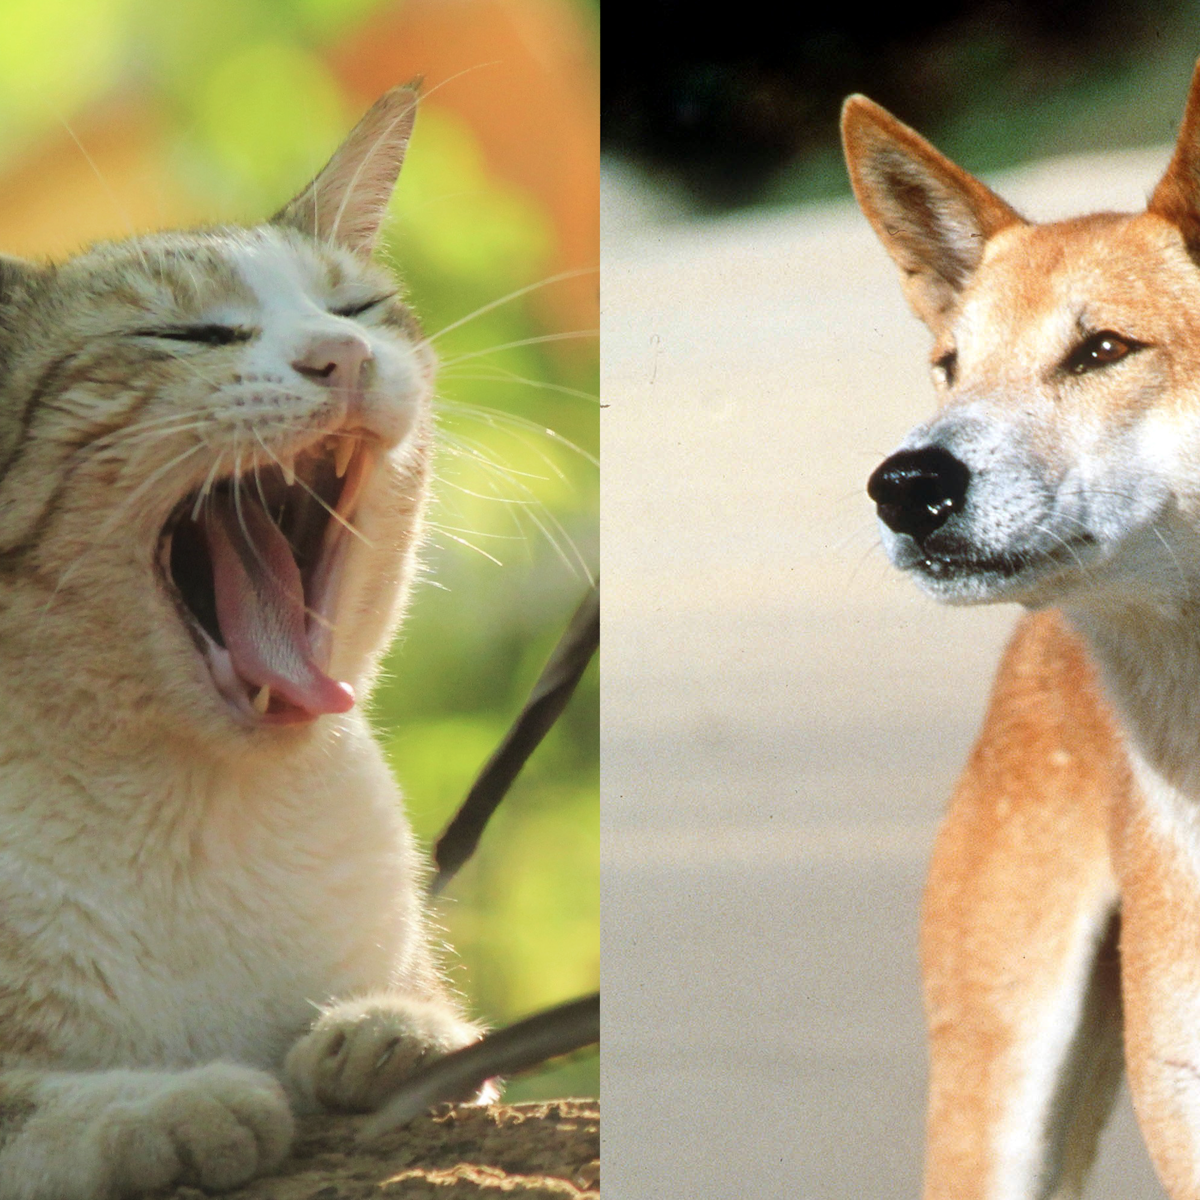 Cats are not scared off by dingoes. We must find another way to protect  native animals